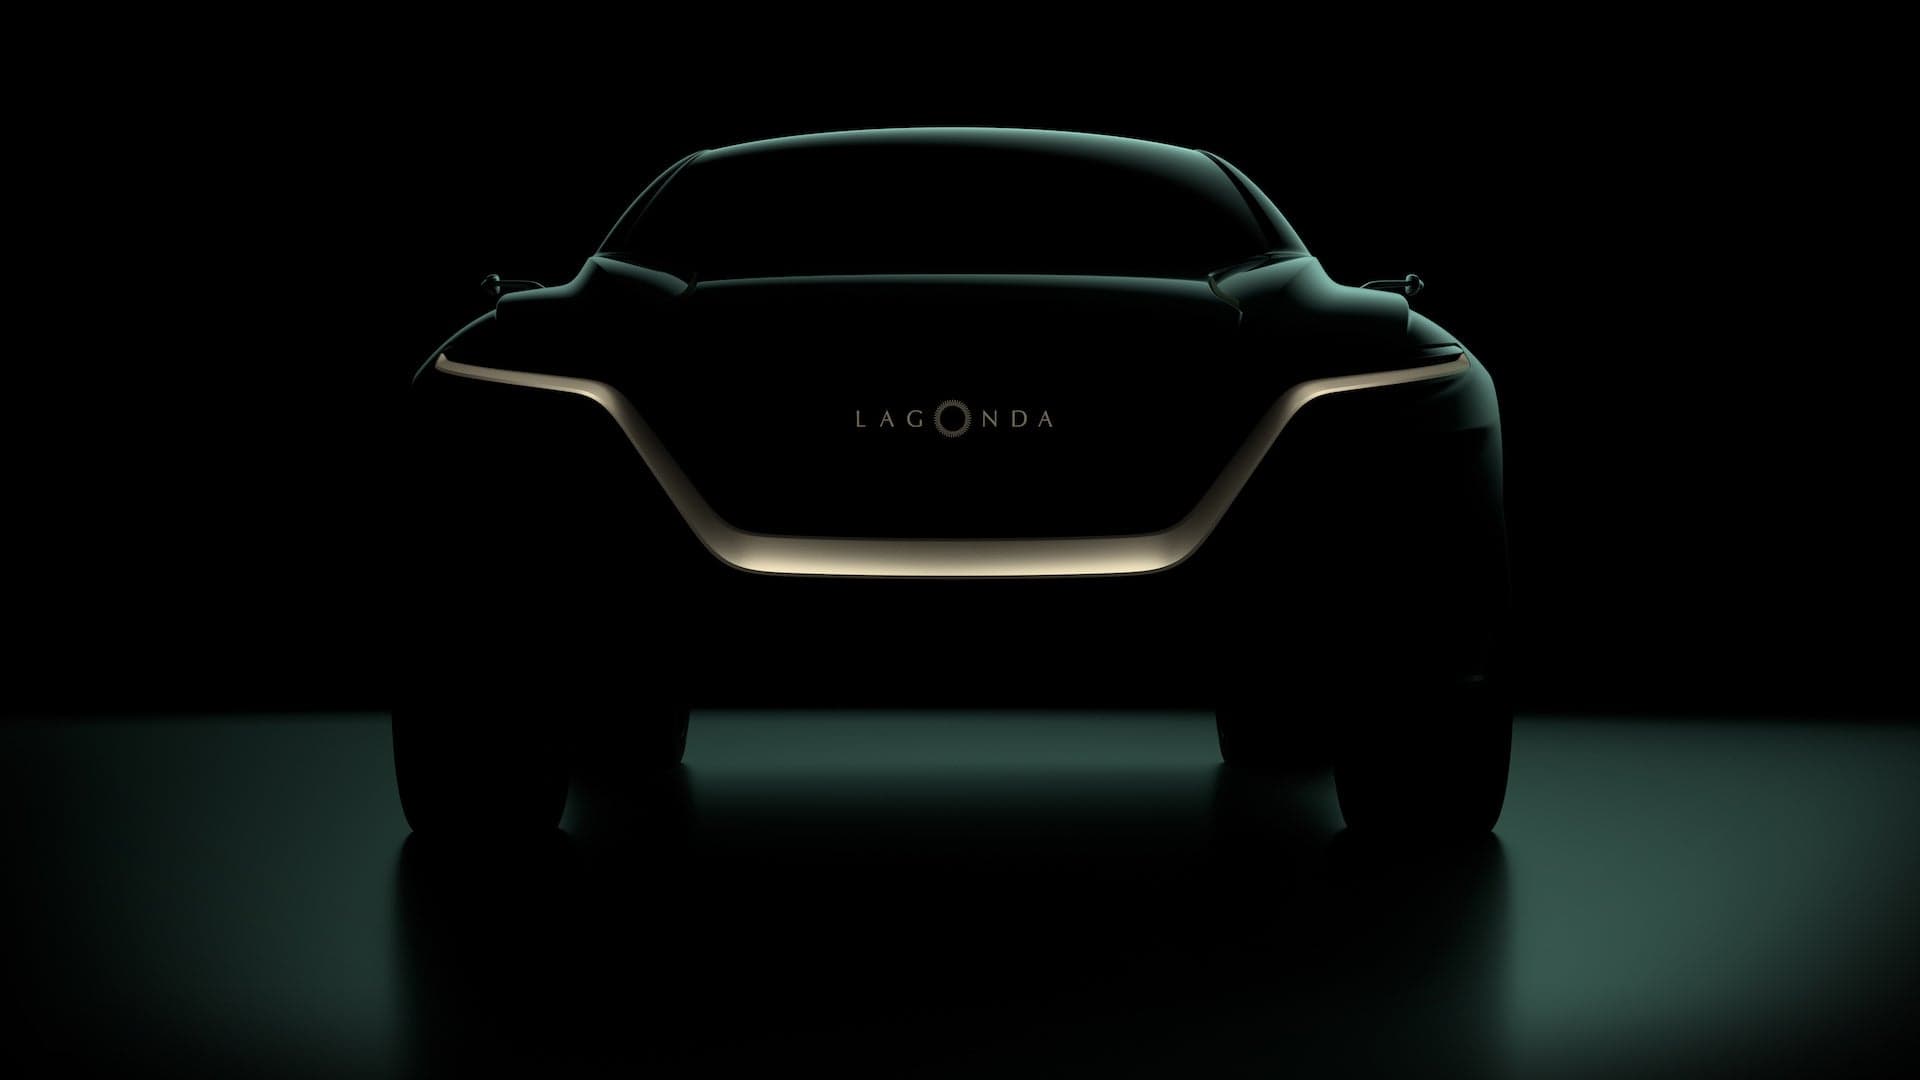 First Look: Aston Martin Lagonda Teases Uber Luxurious, All-Electric SUV Concept